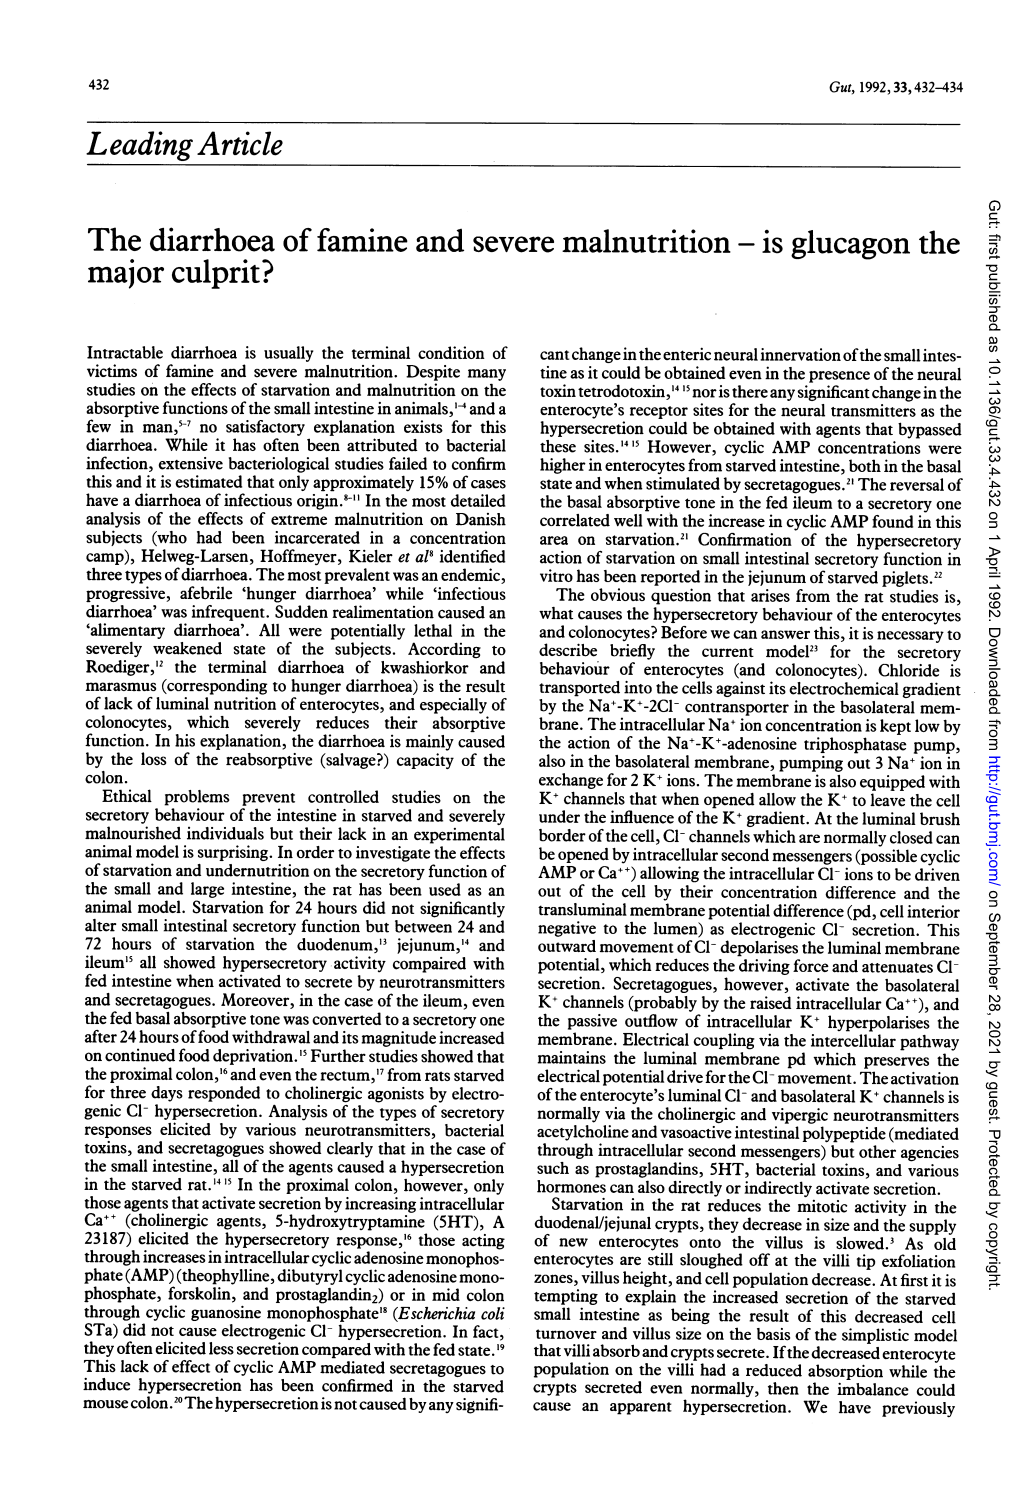 Leadingarticle Gut: First Published As 10.1136/Gut.33.4.432 on 1 April 1992